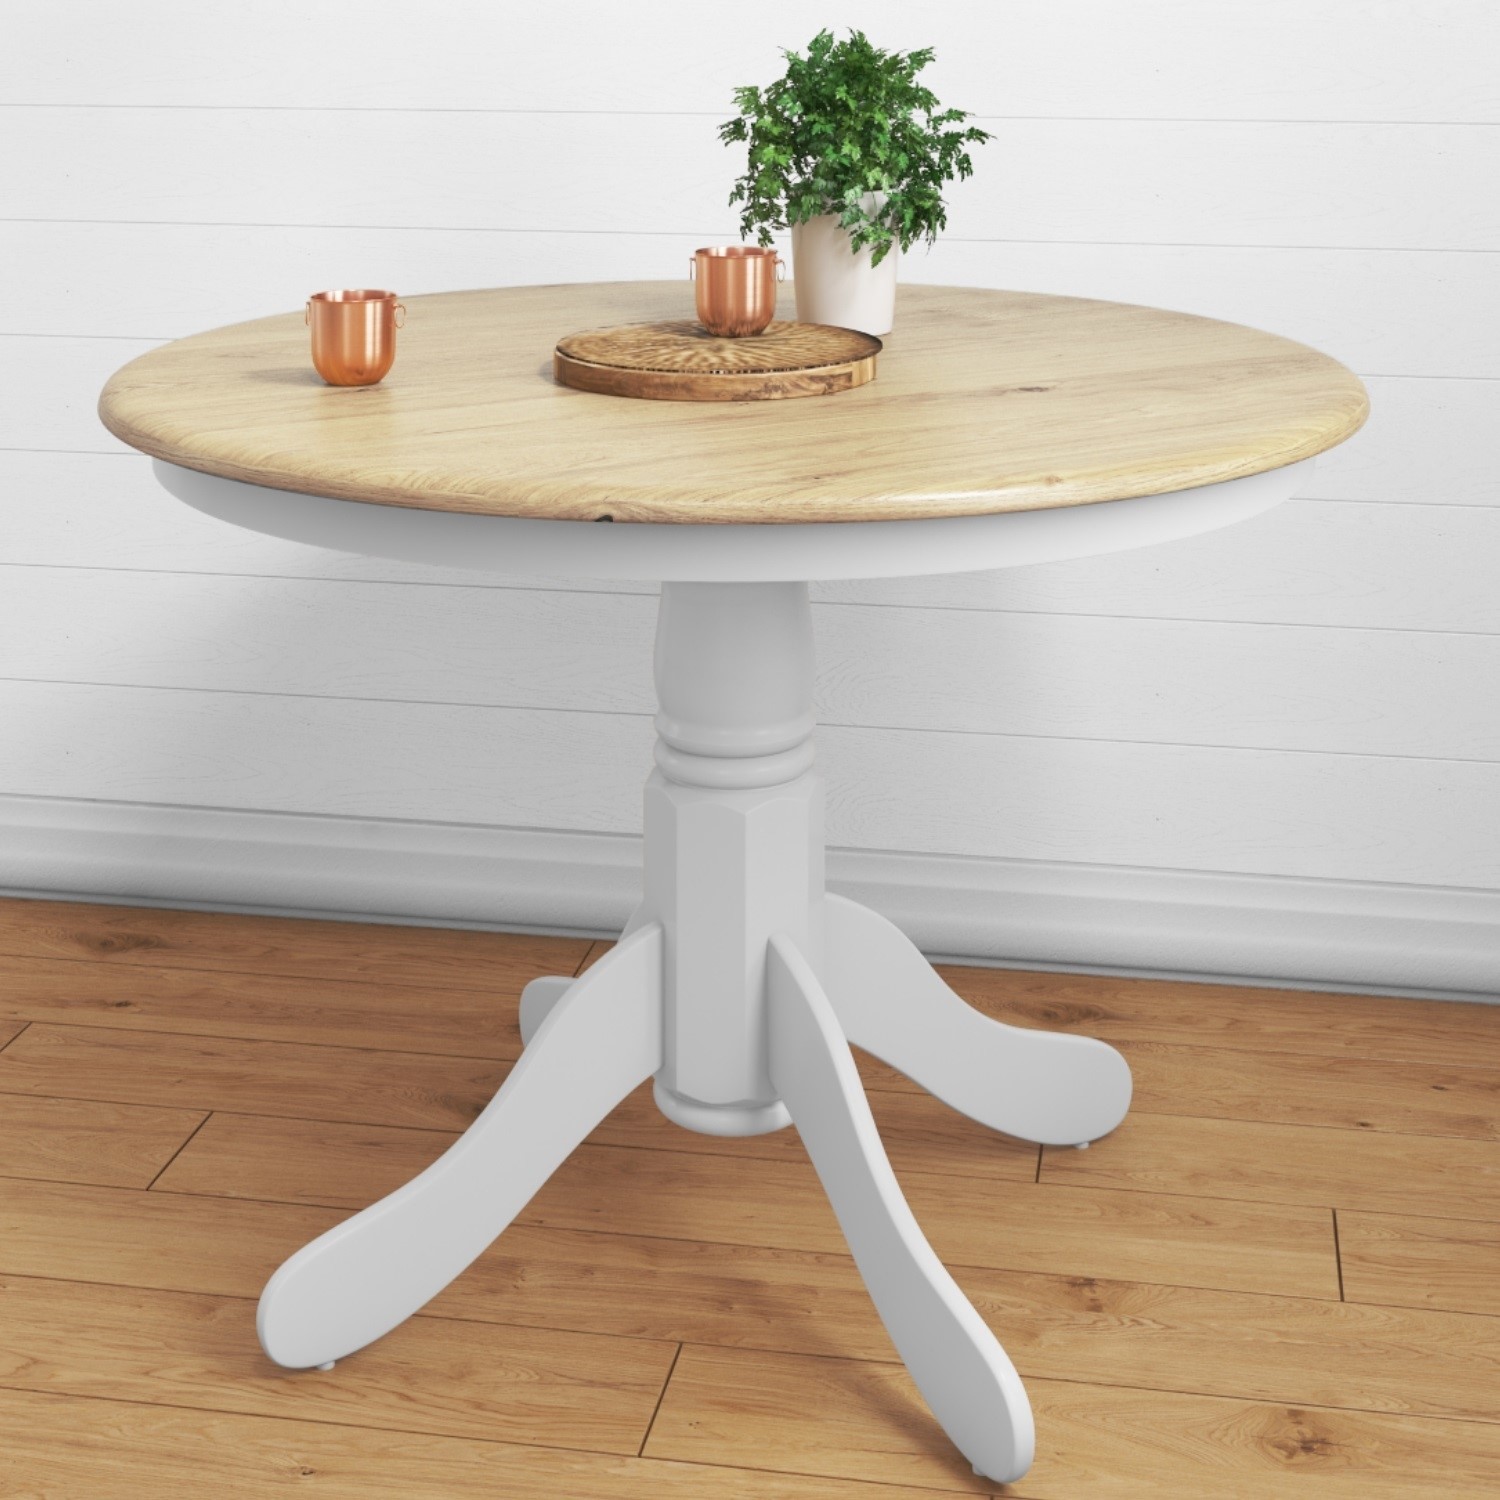 Round Pedestal Dining Table In White With Wood Top Seats 4 Rhode Island Furniture123